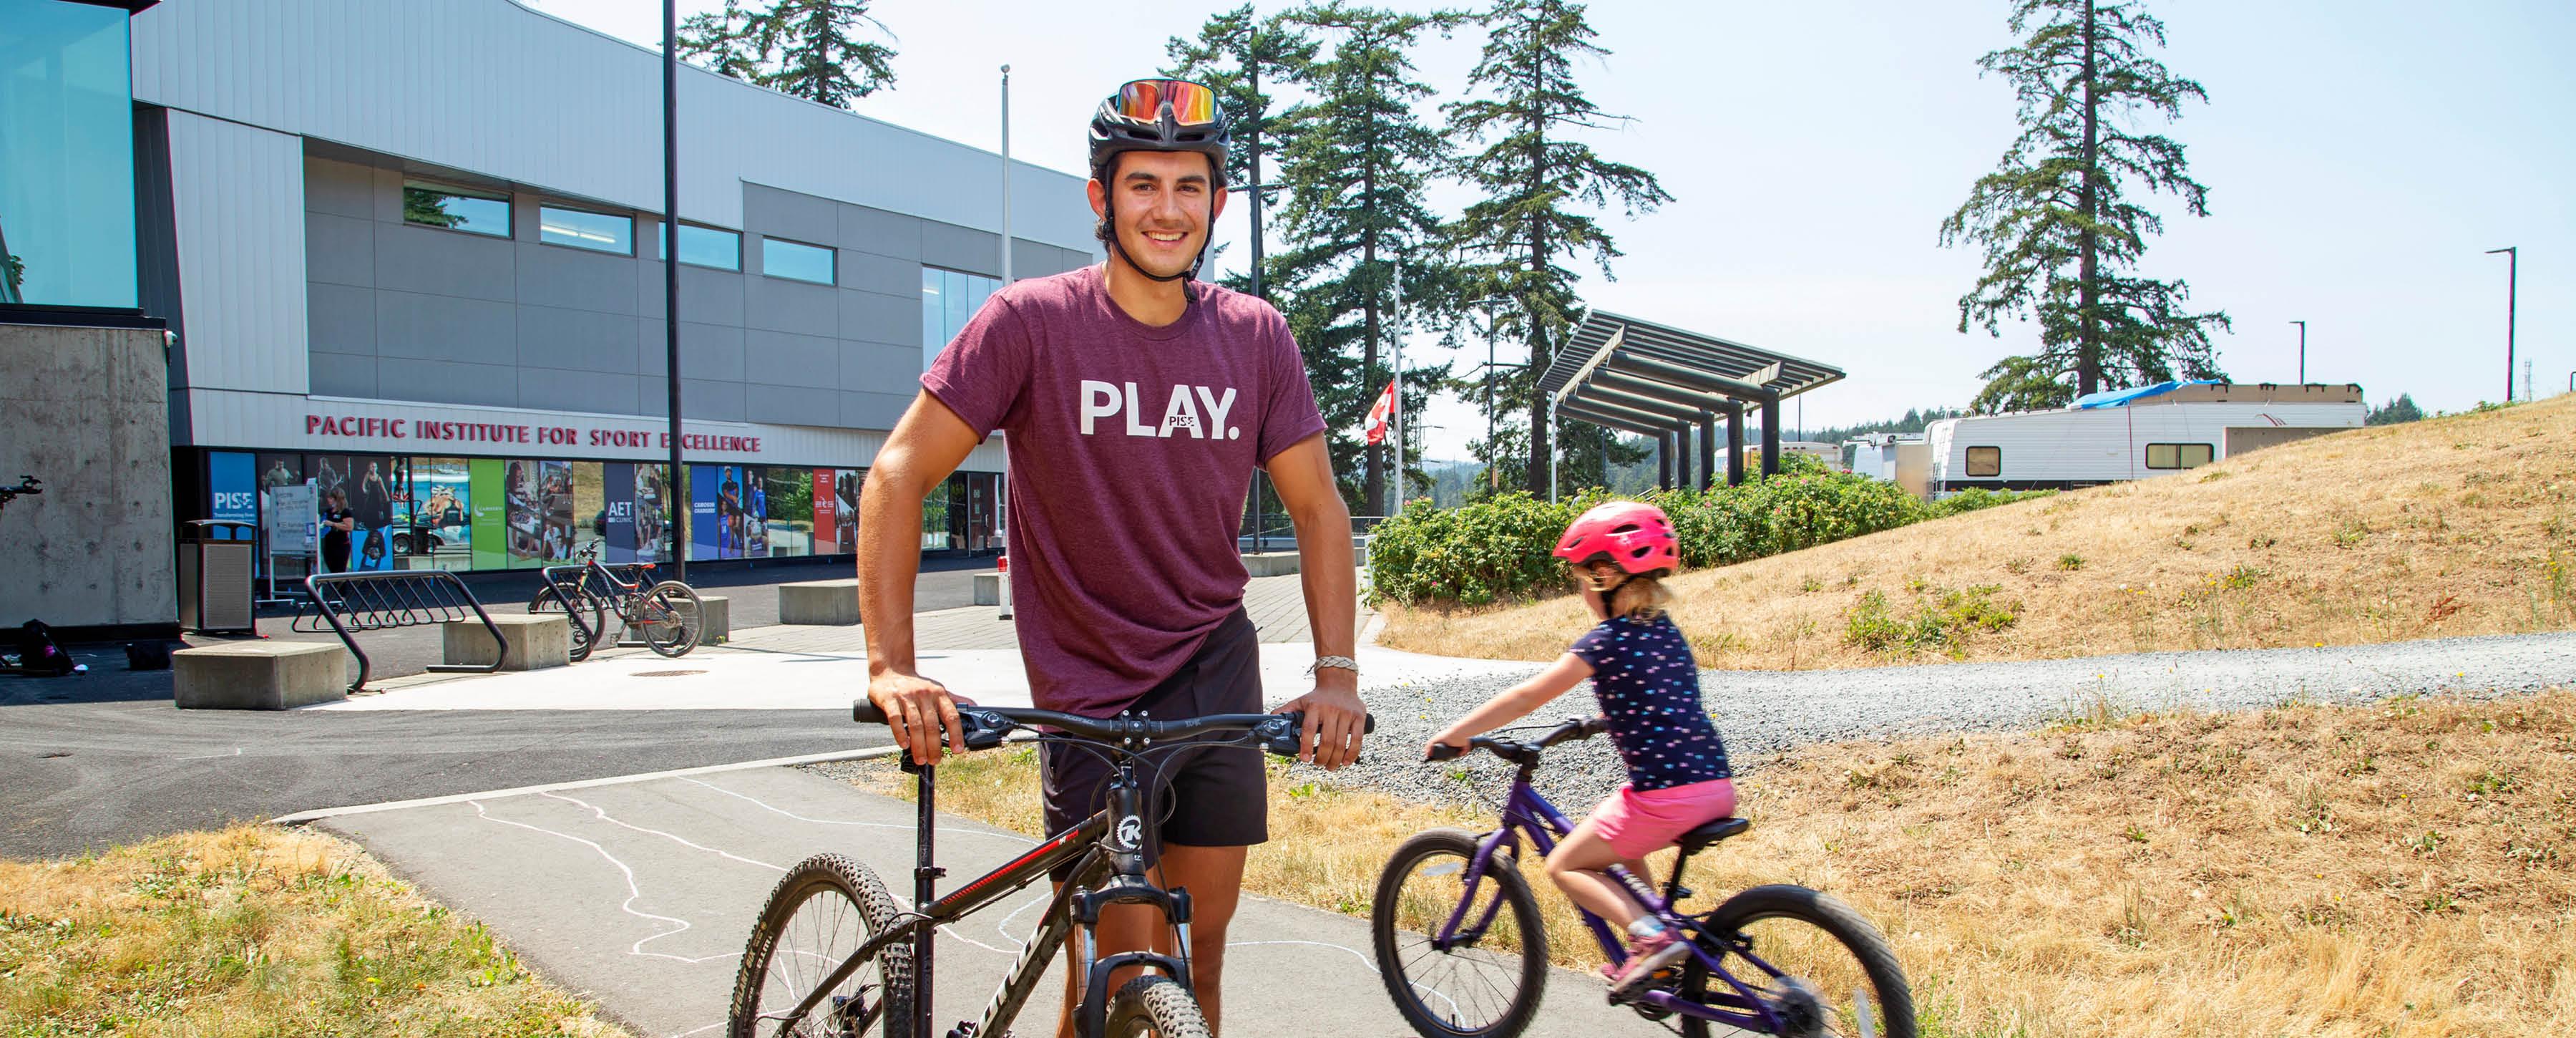 A man wearing shorts, a burgundy t-shirt that says "Play," and a black bike helmet with goggles is posing with a bicycle in front of a field with a building and RVs in the background. He is smiling at the camera.